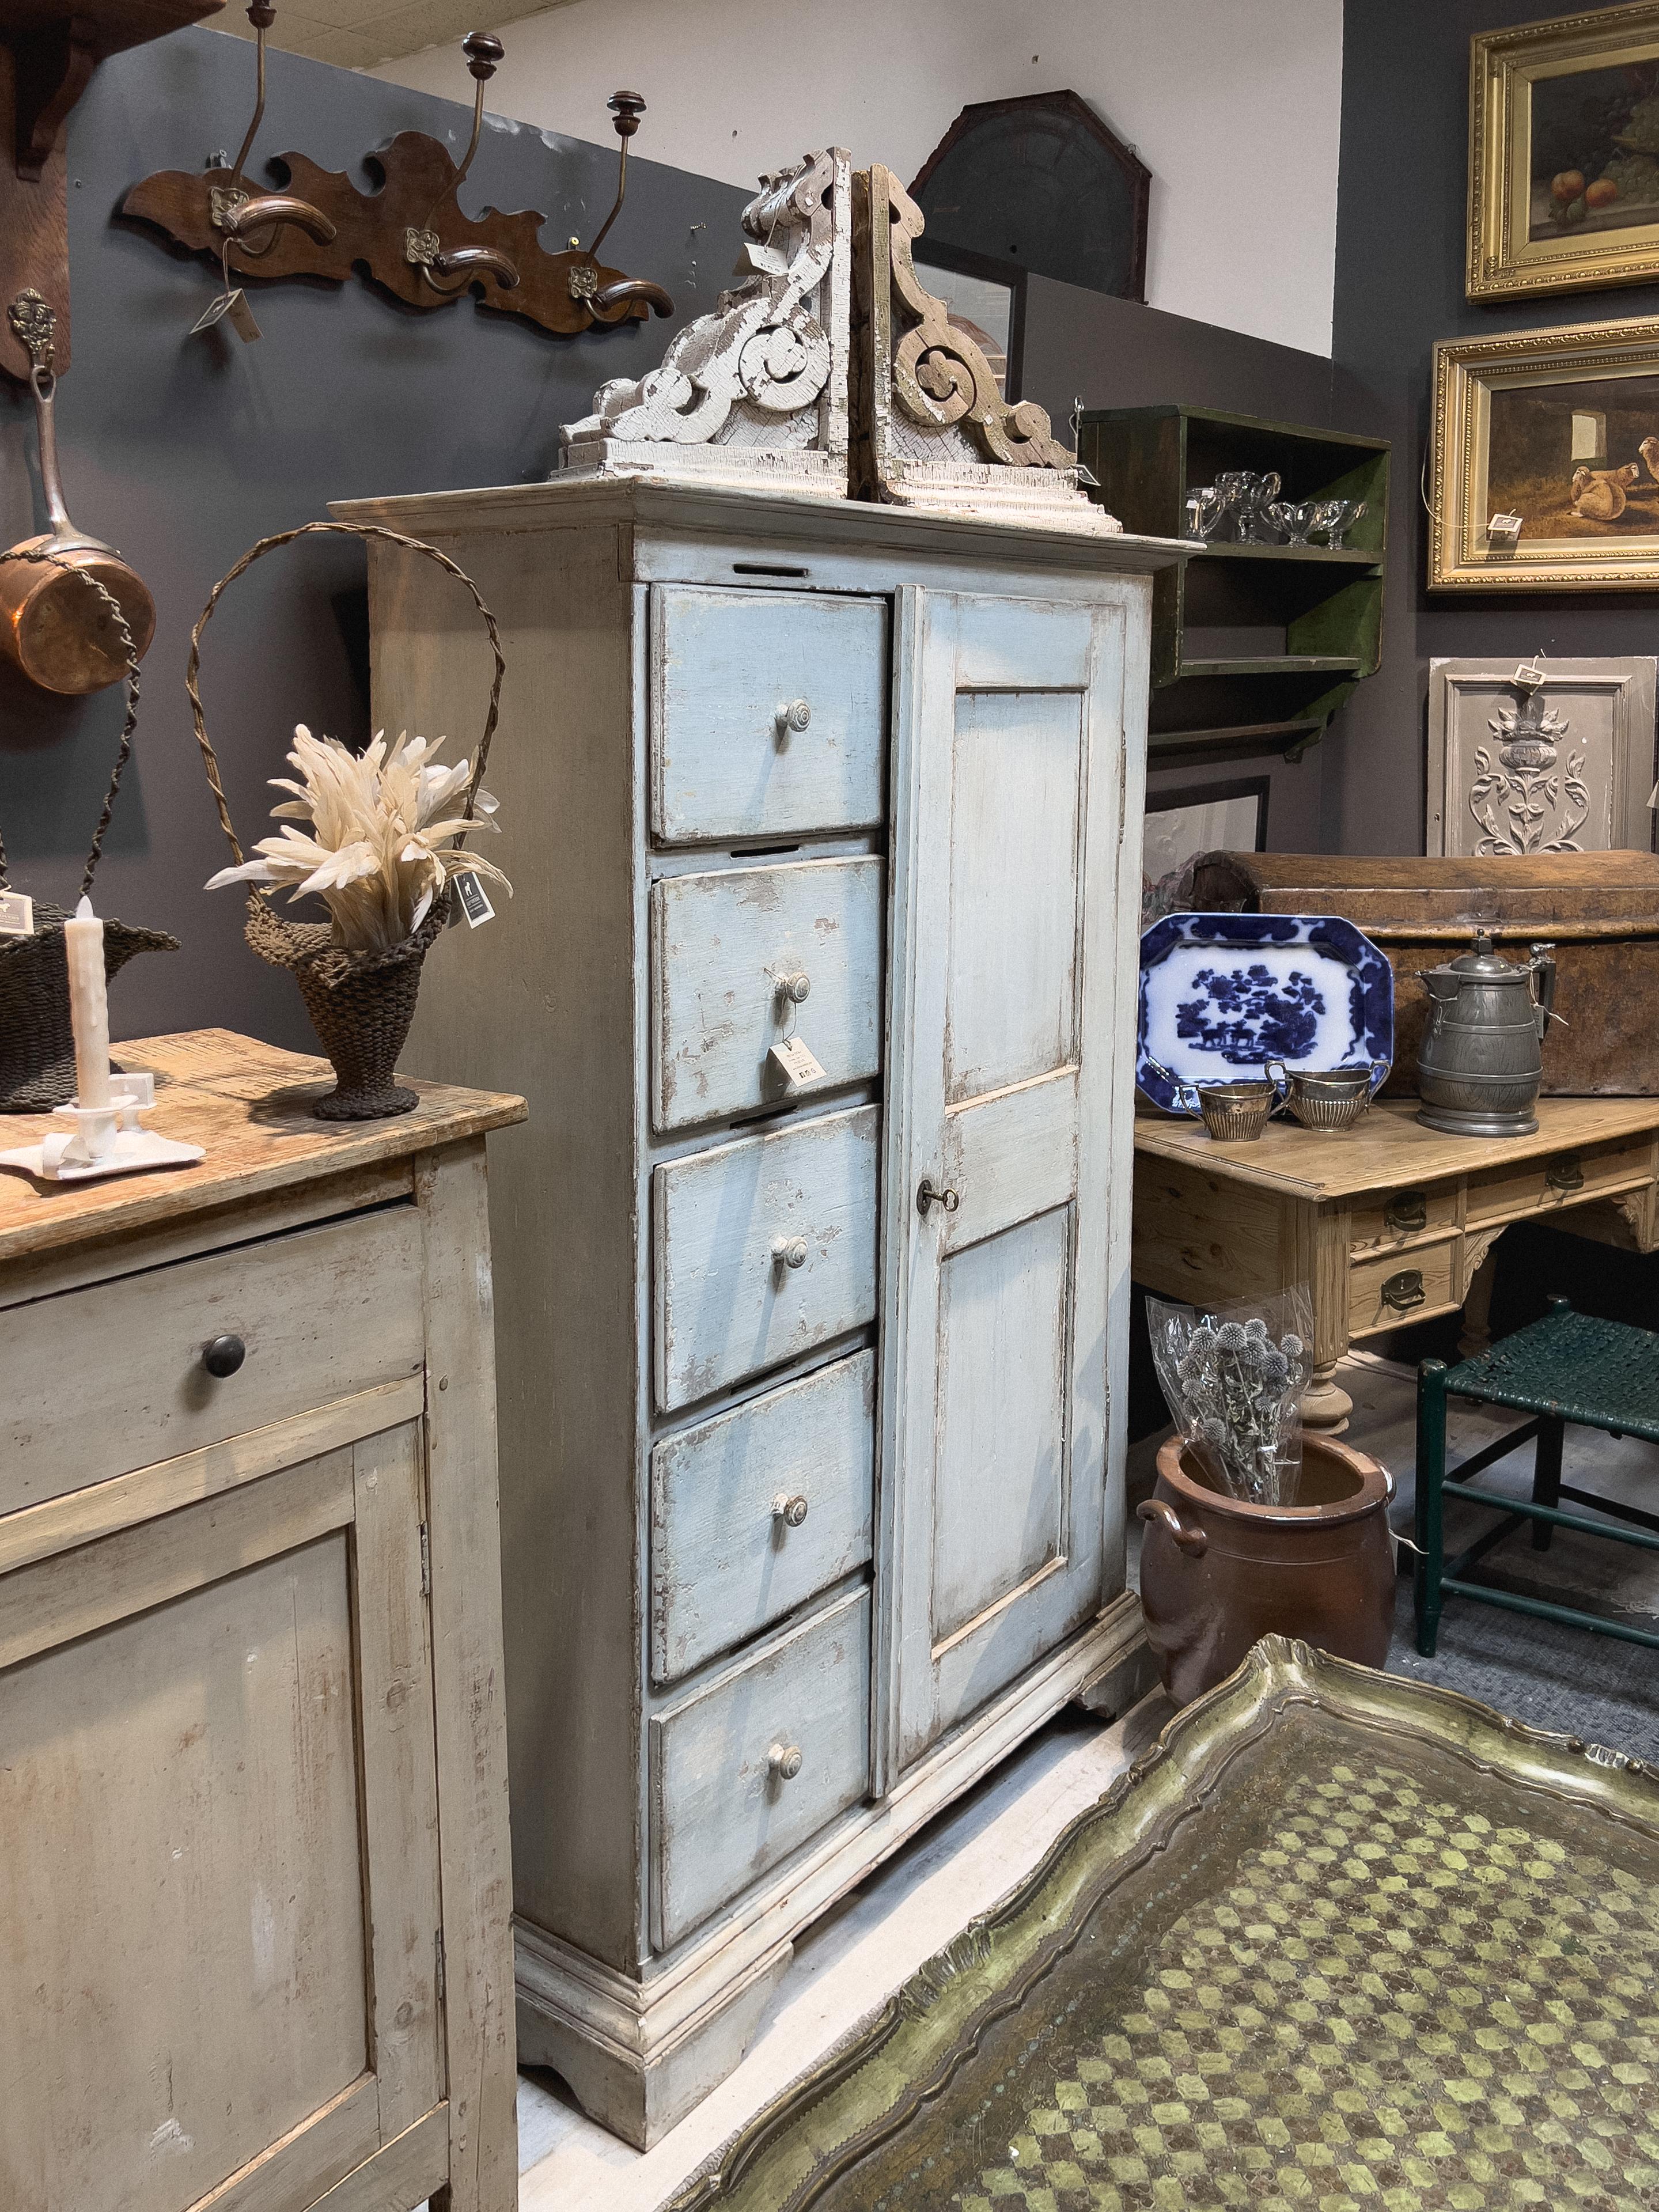 Circa 1870s European kitchen cupboard with a restored painted finish. A single key is able to lock all five drawers and keep the cupboard door closed. There is a slot above each drawer perhaps to insert paperwork while it's locked.

Piece is